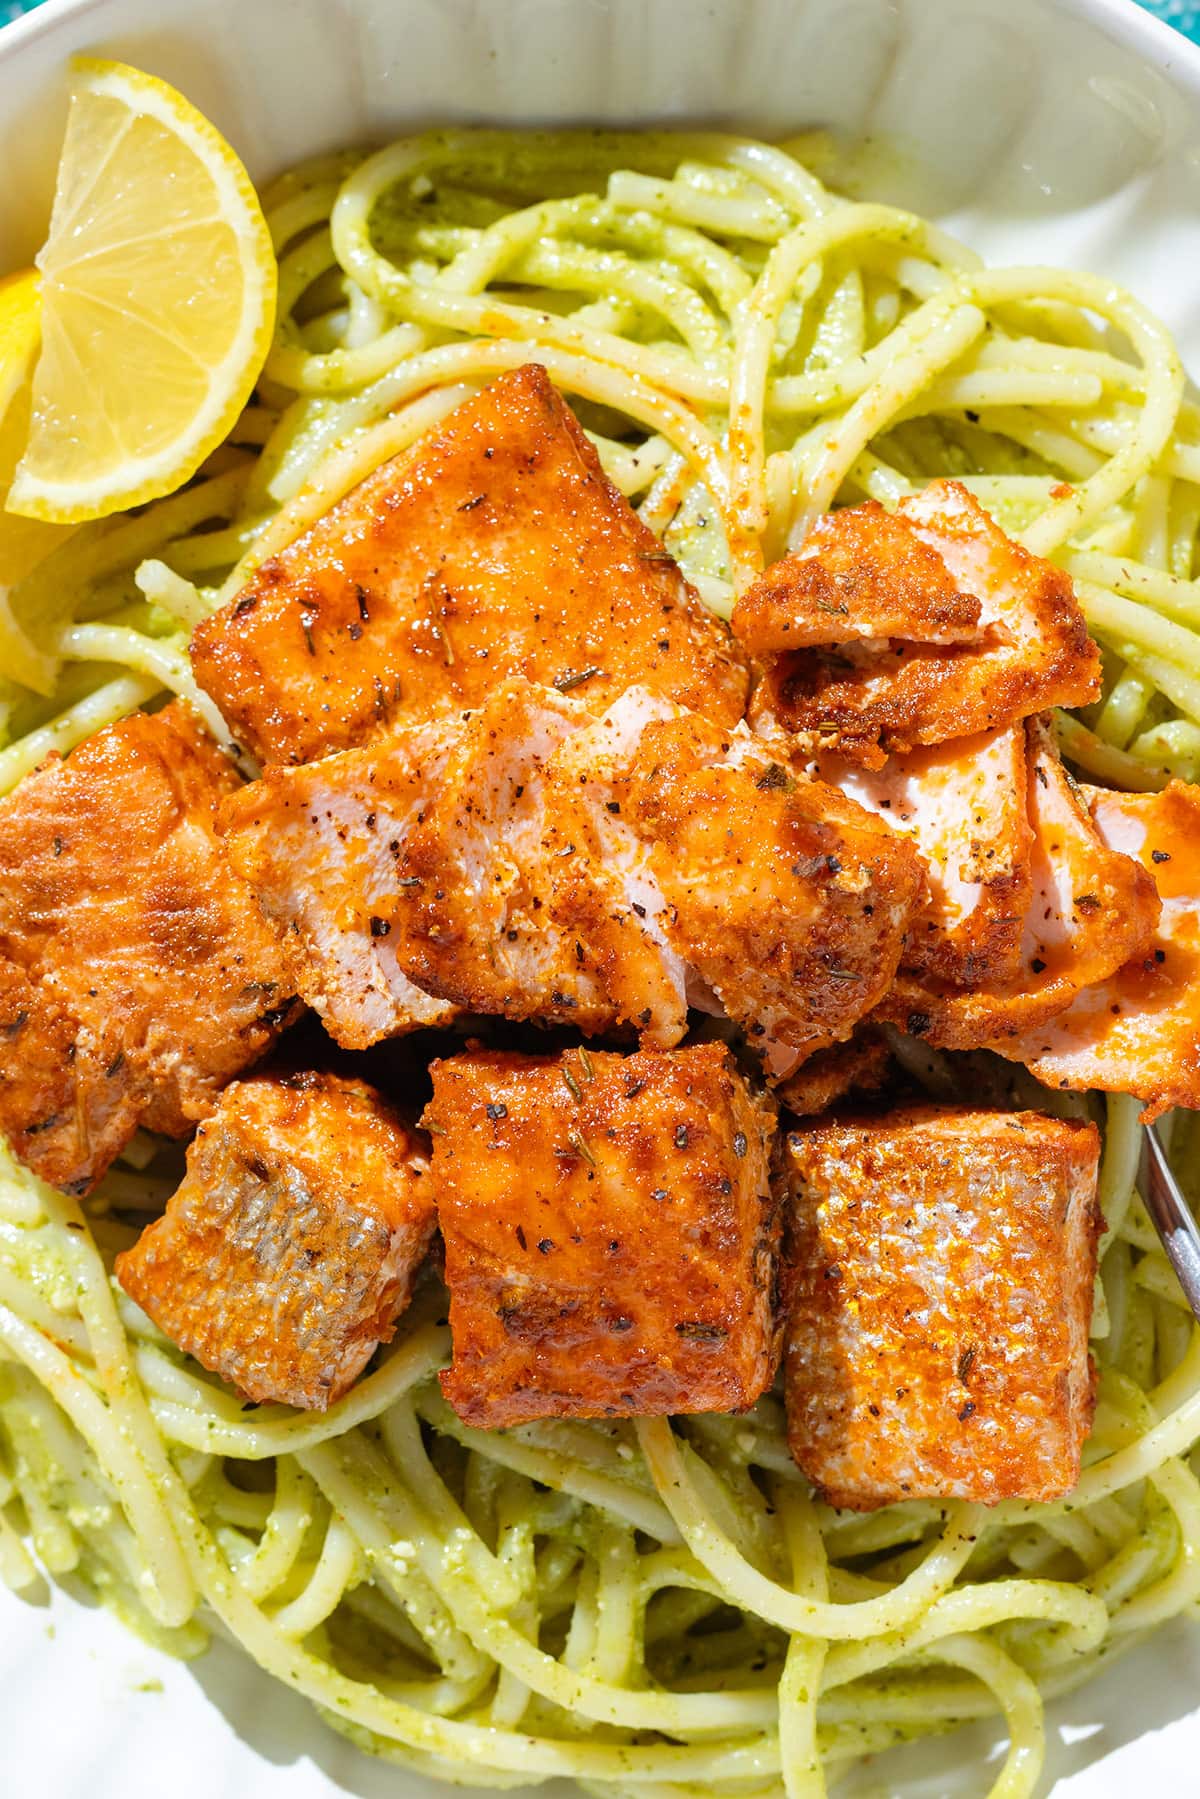 Pesto spaghetti in a white bowl topped with roasted diced salmon and lemon wedges on the side.